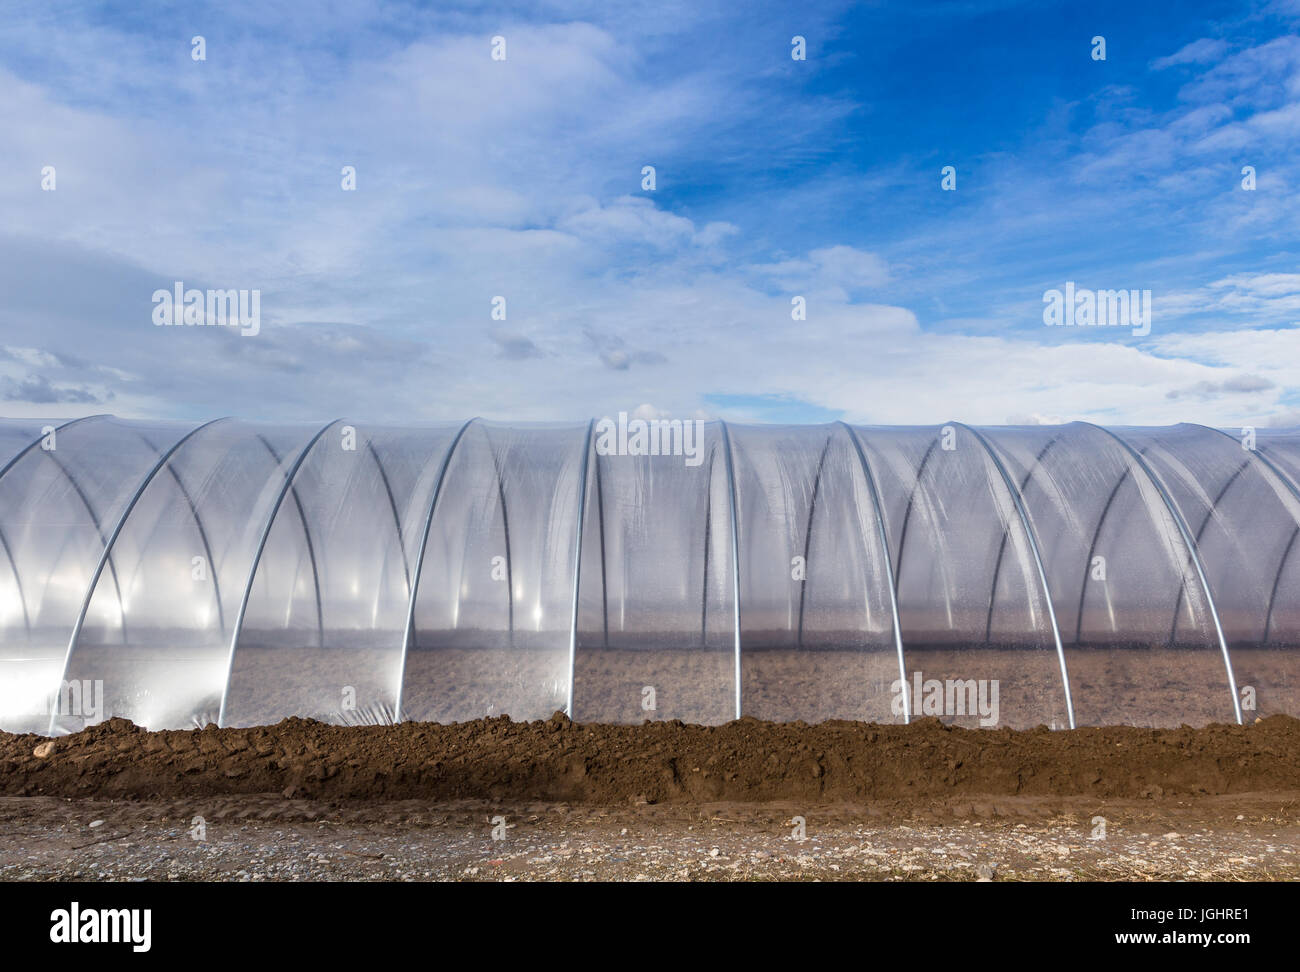 Greenhouse tunnel from polythene plastic on an agricultural field against the blue sky Stock Photo